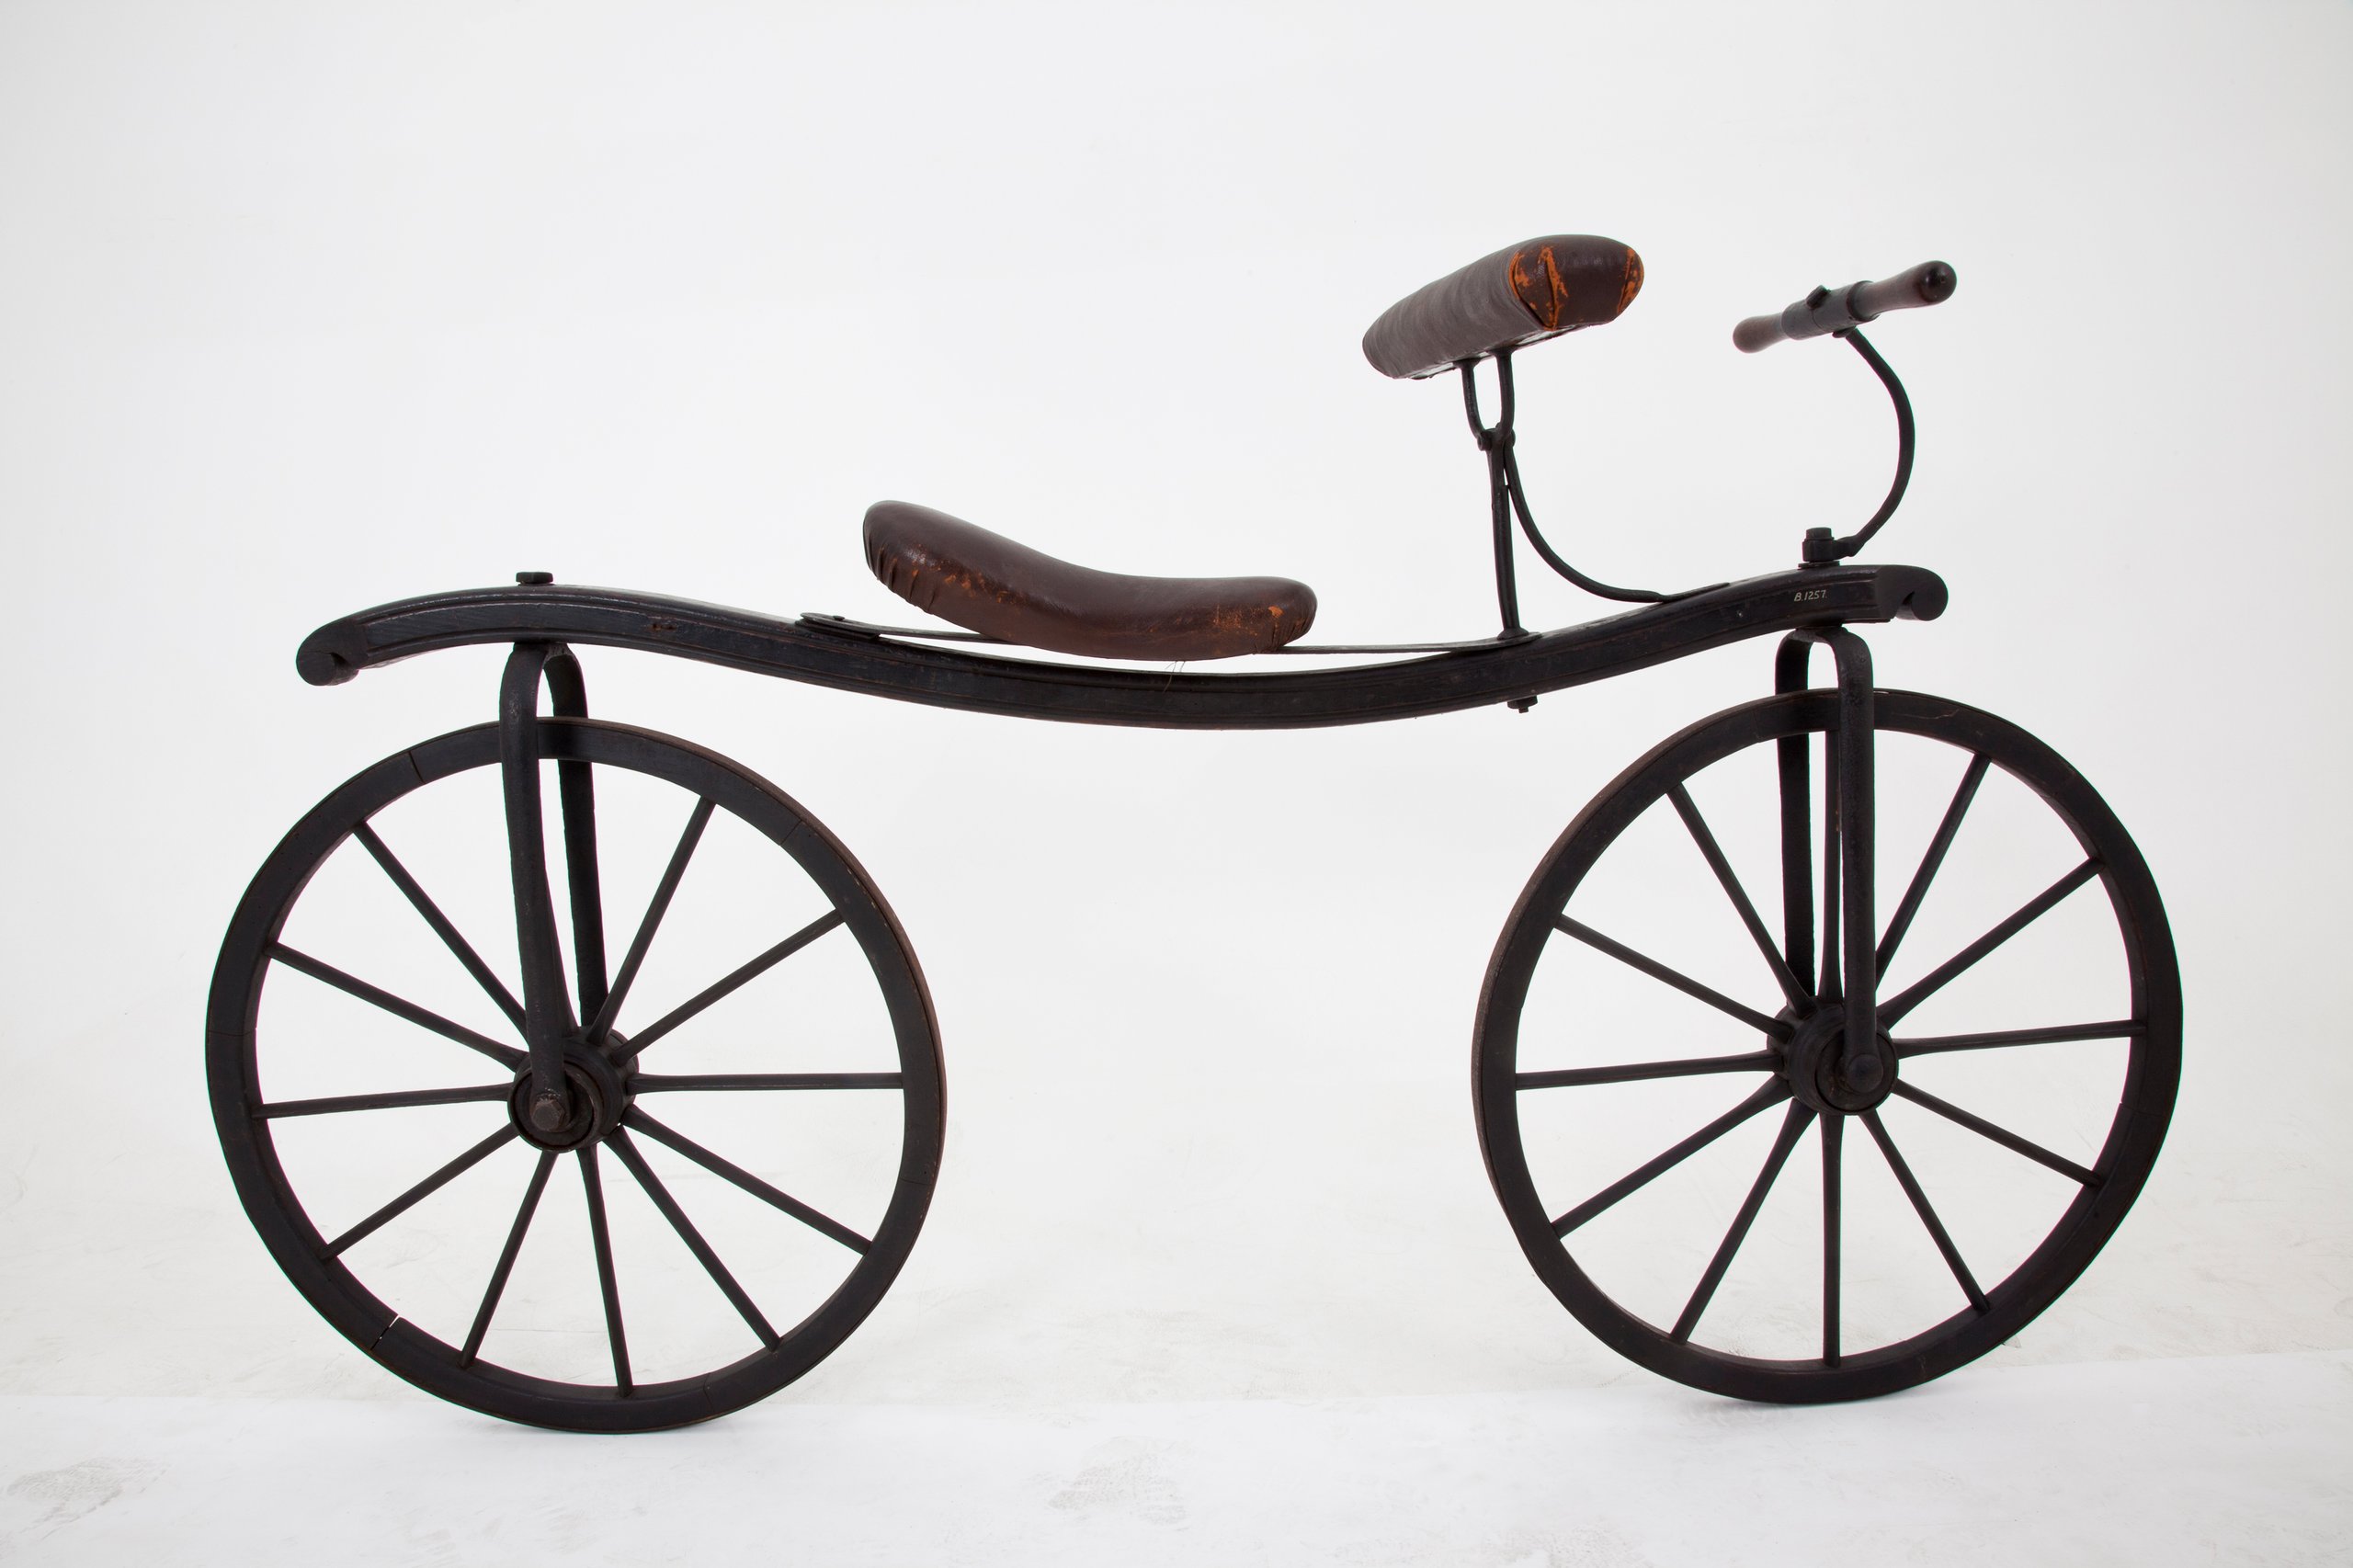 Reproduction Draisine or hobby horse bicycle